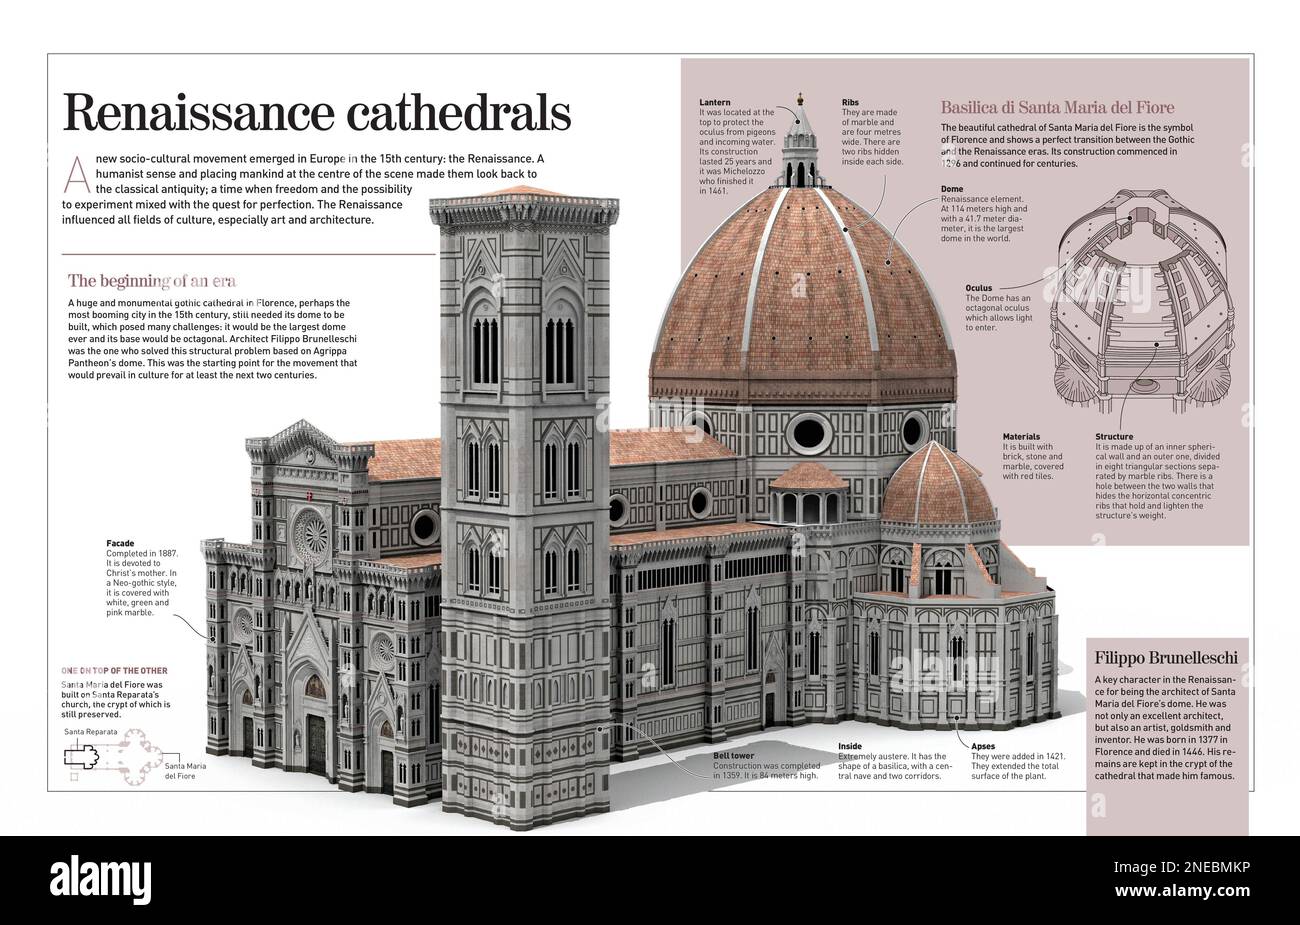 Infographic about Renaissance cathedrals, especially the Cathedral of Santa Mari del Fiore (Florence, 15th century). [Adobe InDesign (.indd); 4960x3188]. Stock Photo